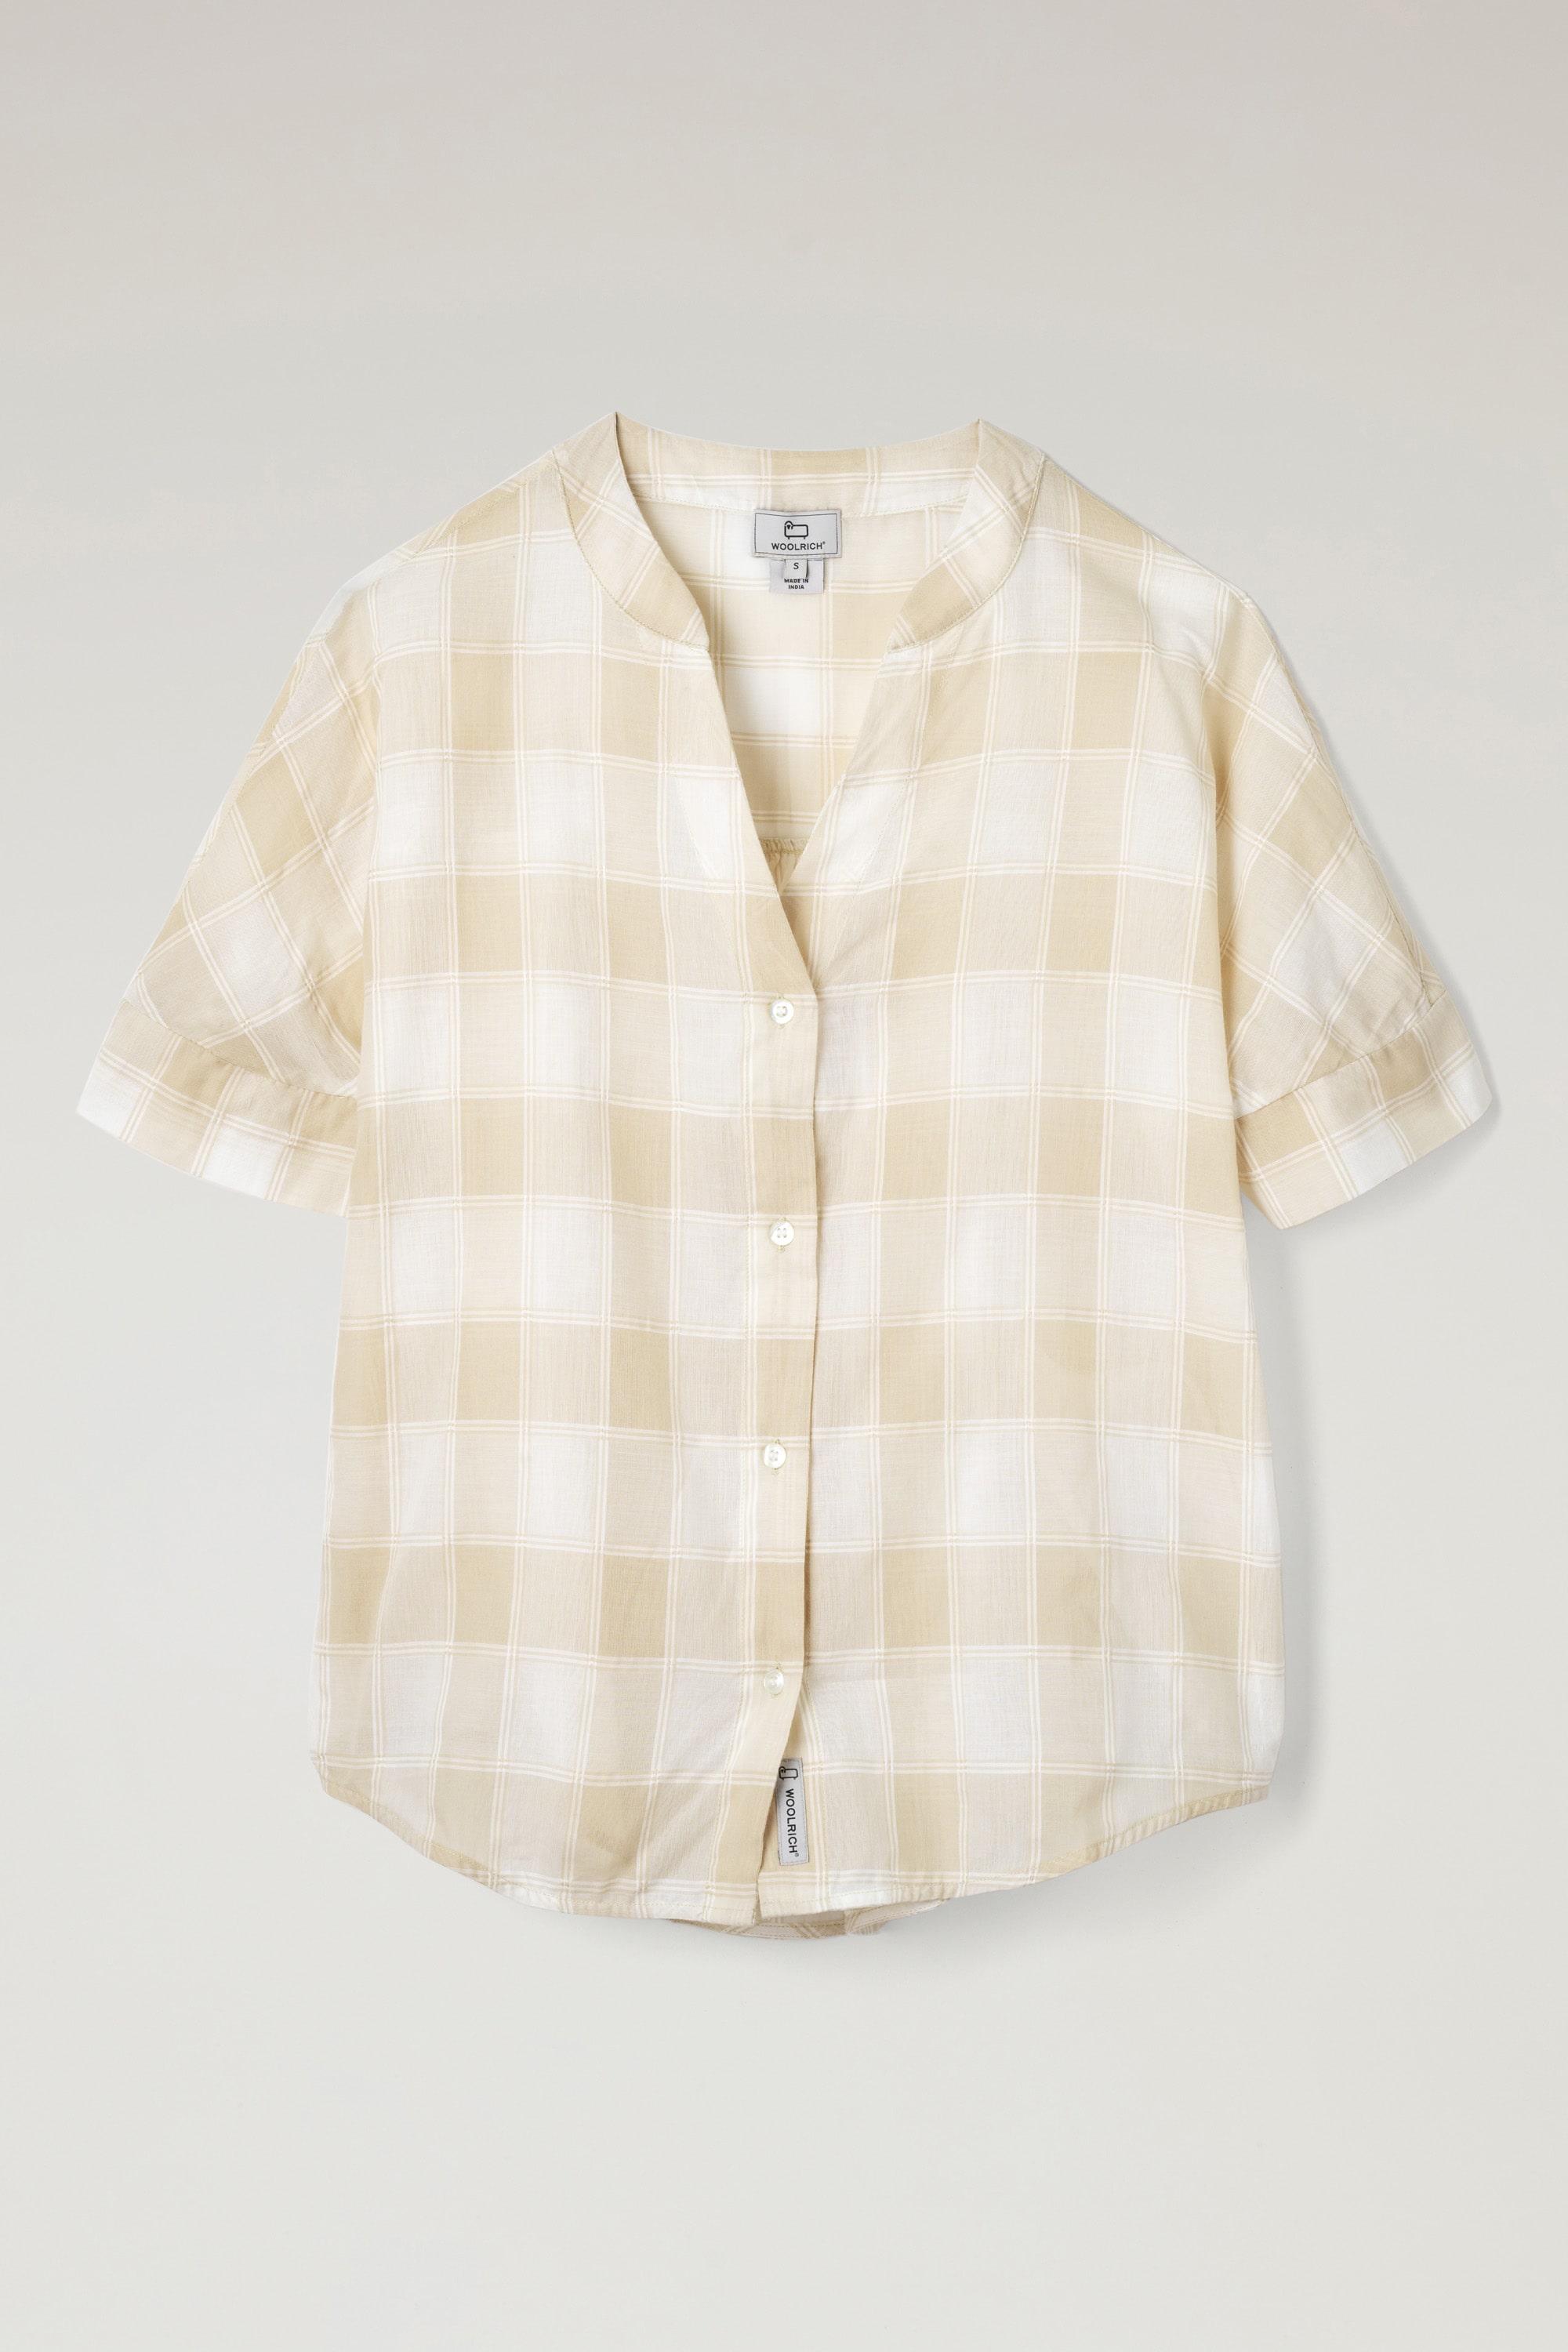 CHECK VOILE SHIRT